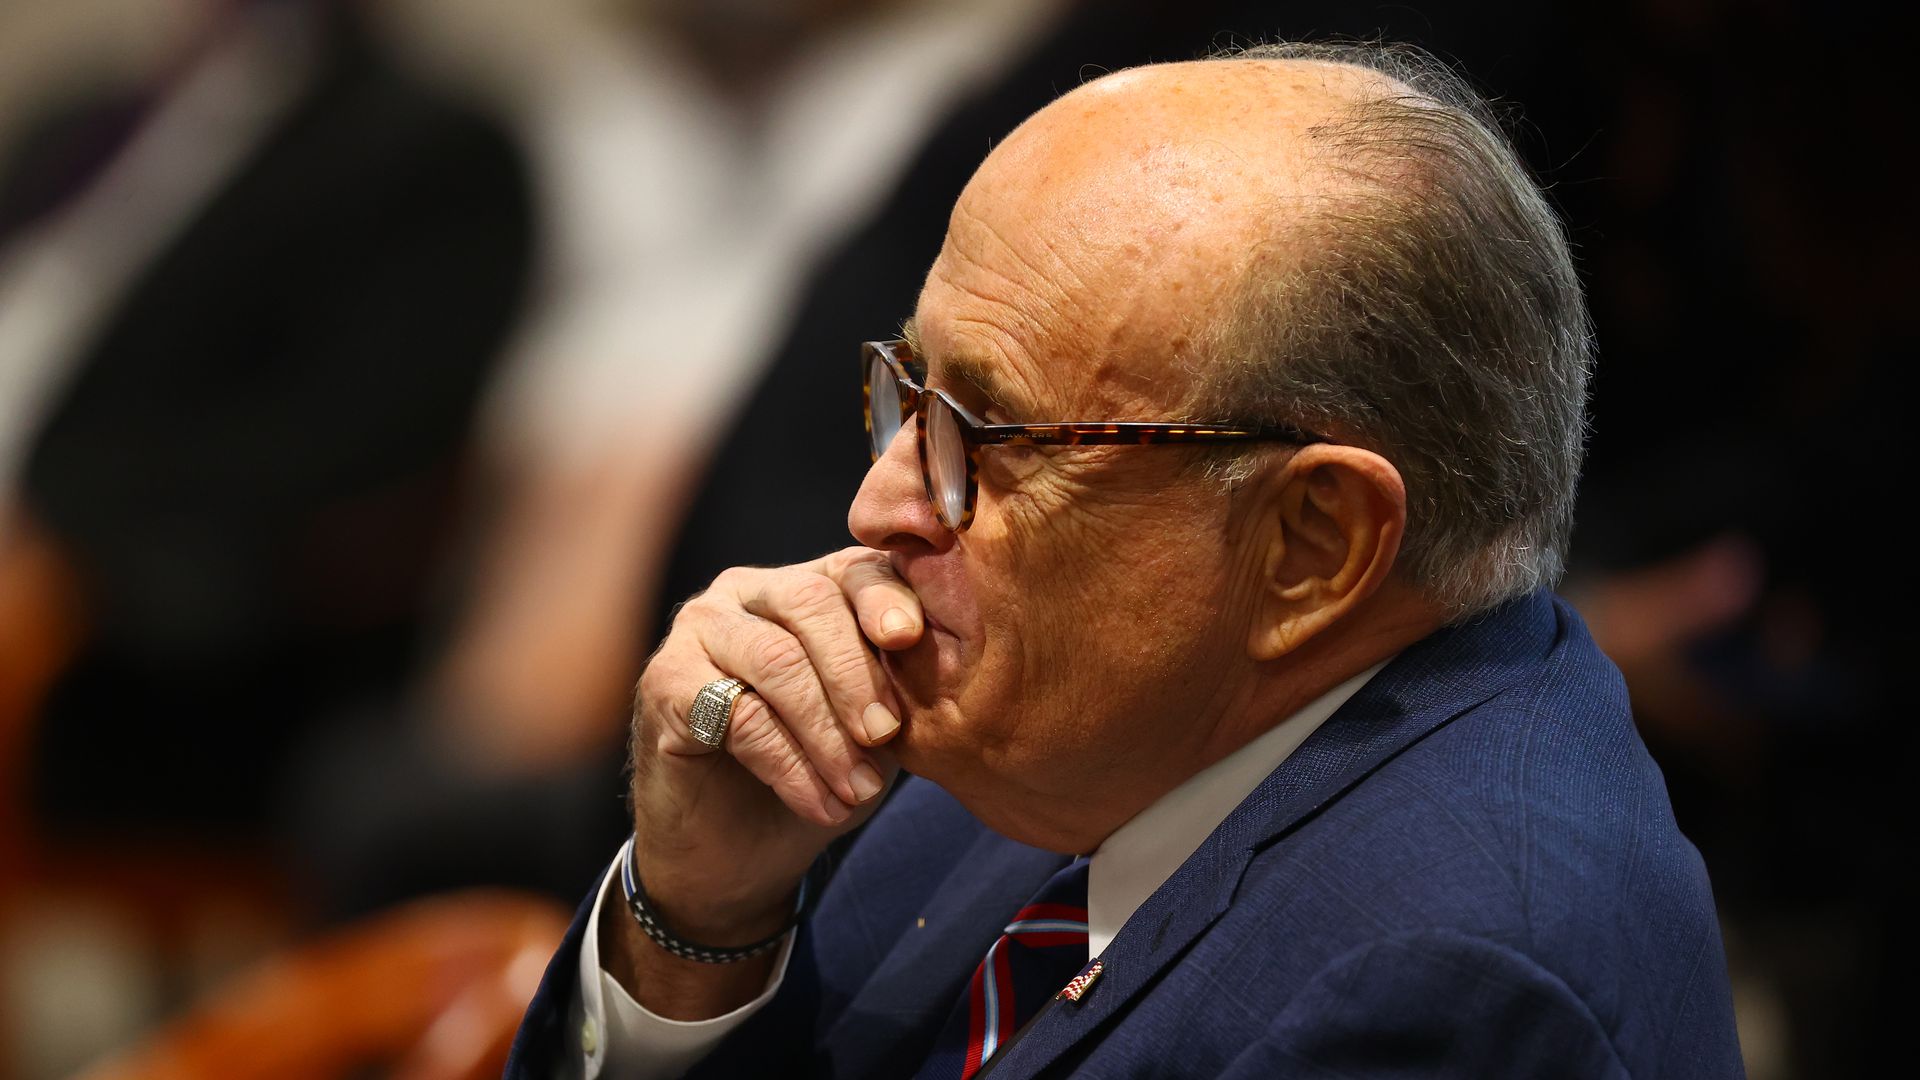 Rudy Giuliani wears a blue suit and is photographed from his side profile. His hand is over his mouth. 